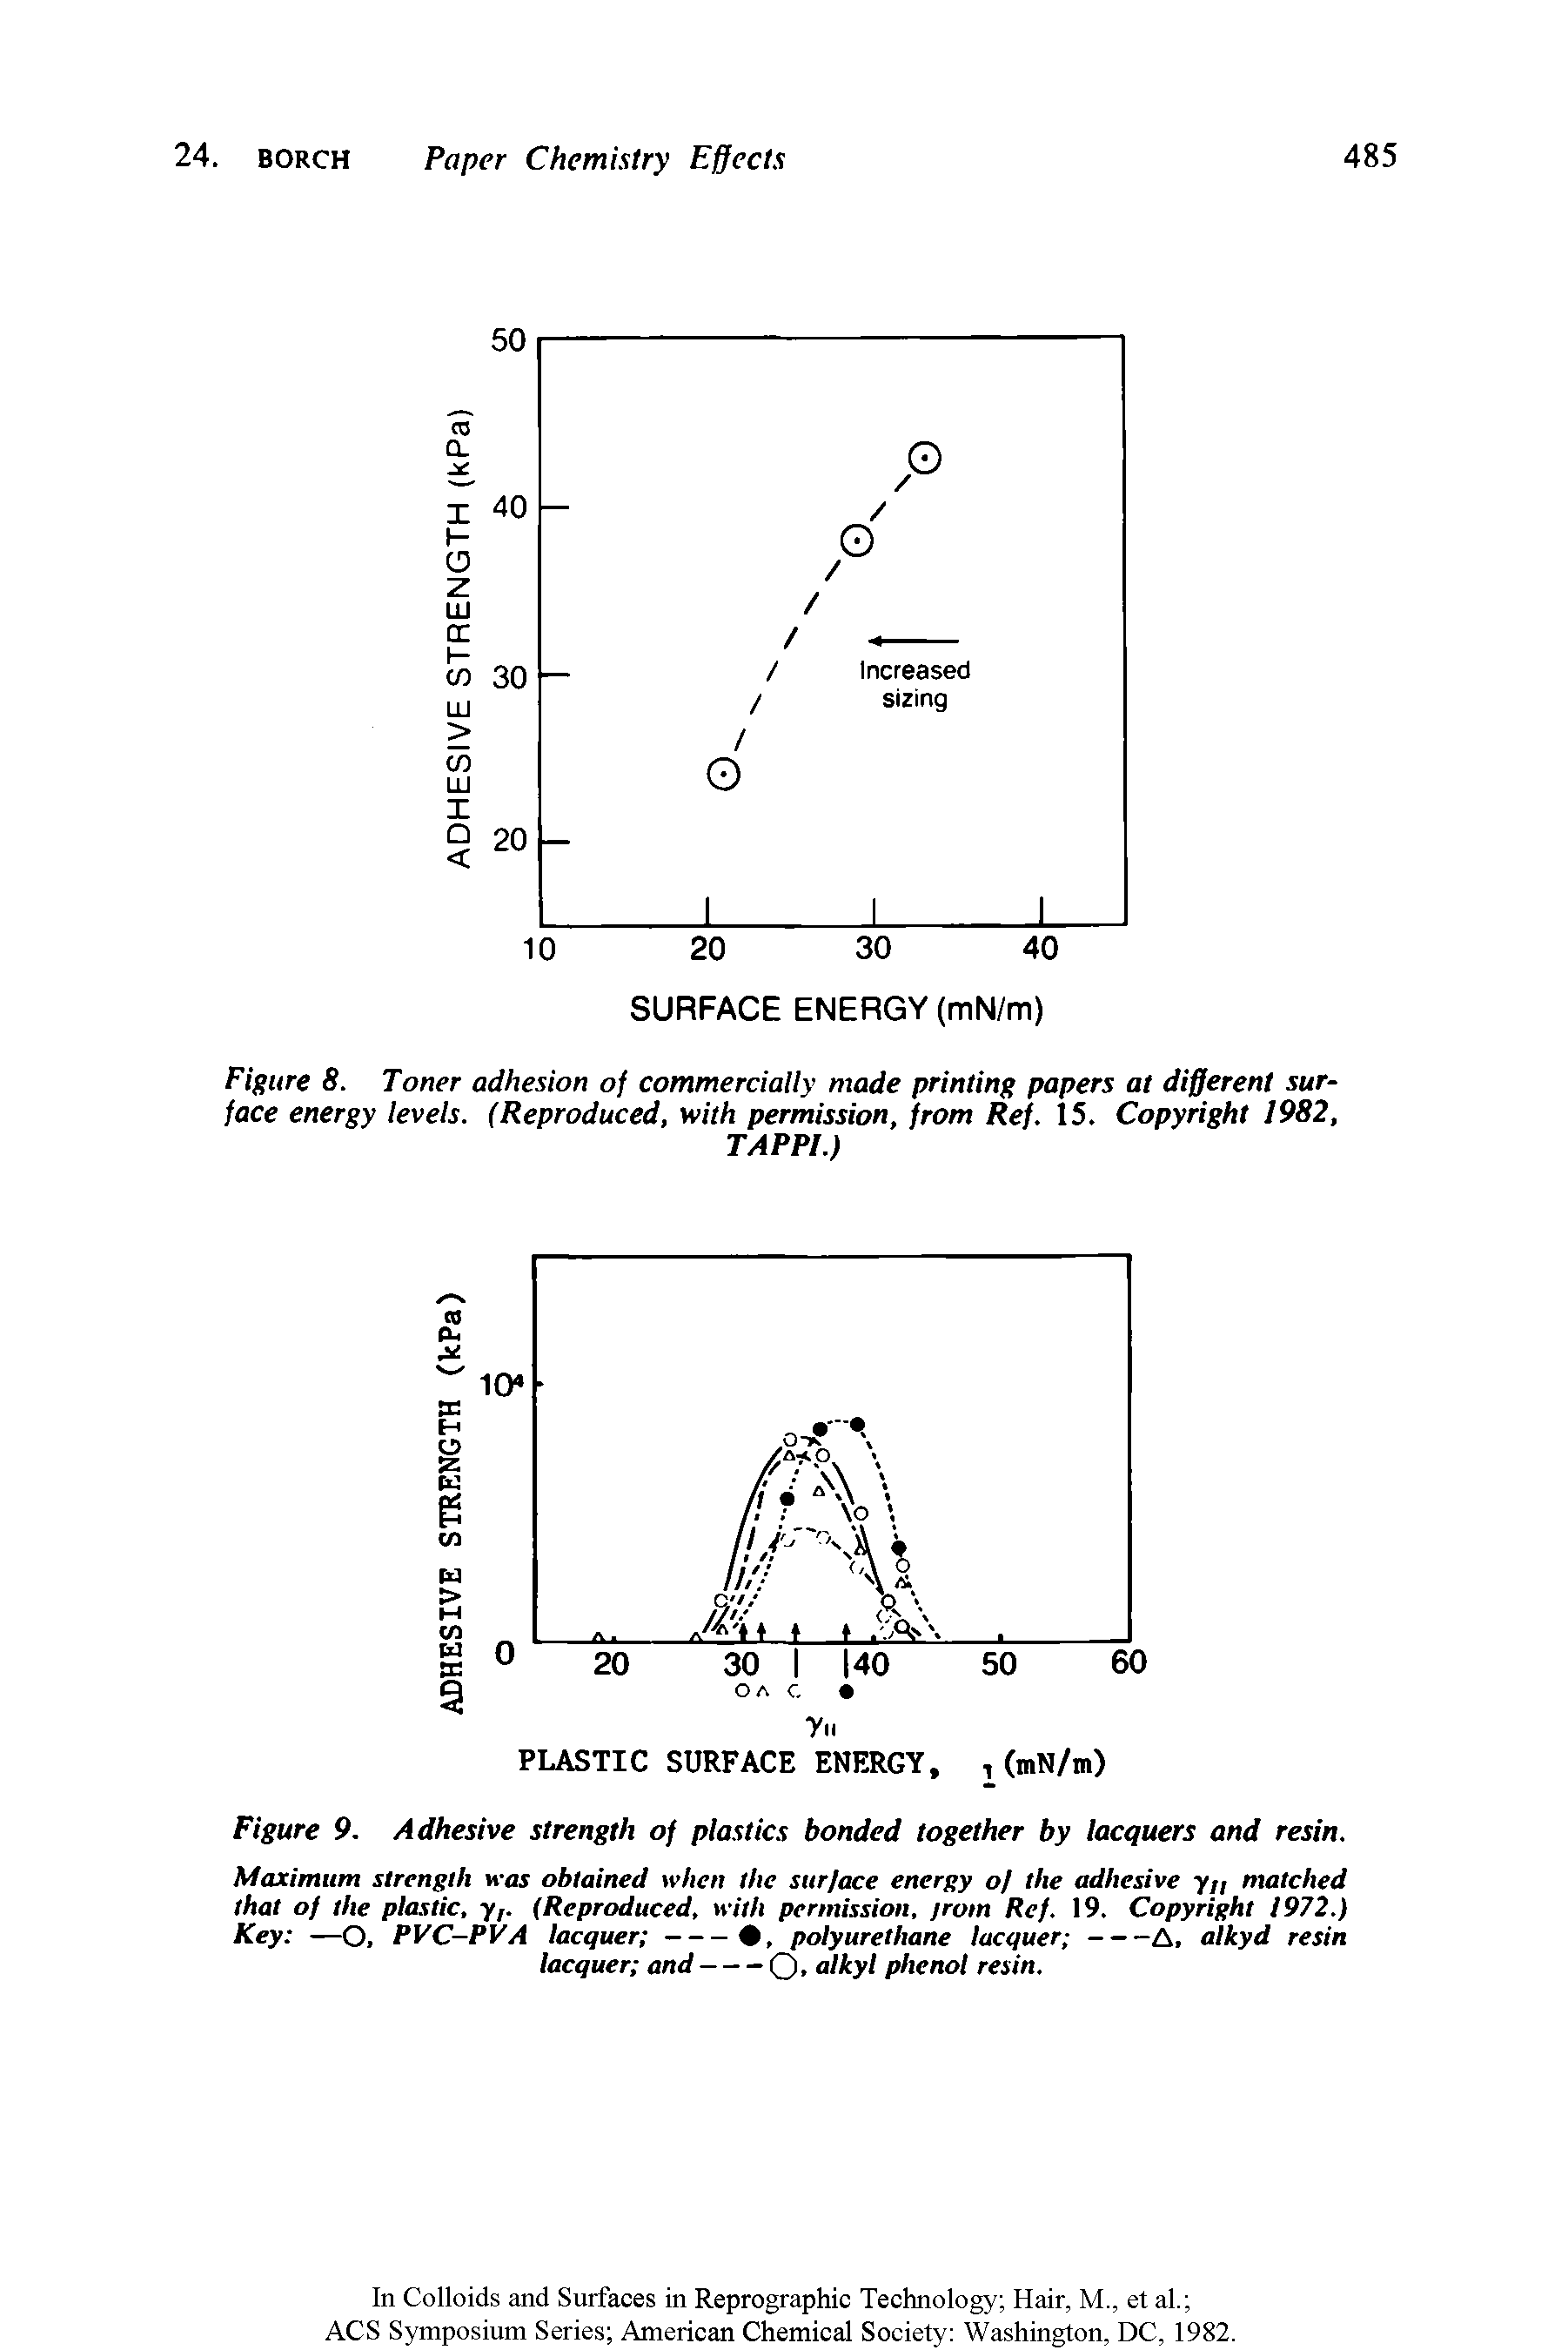 Figure 8. Toner adhesion of commercially made printing papers at different surface energy levels. (Reproduced, with permission, from Ref. 15. Copyright 1982,...